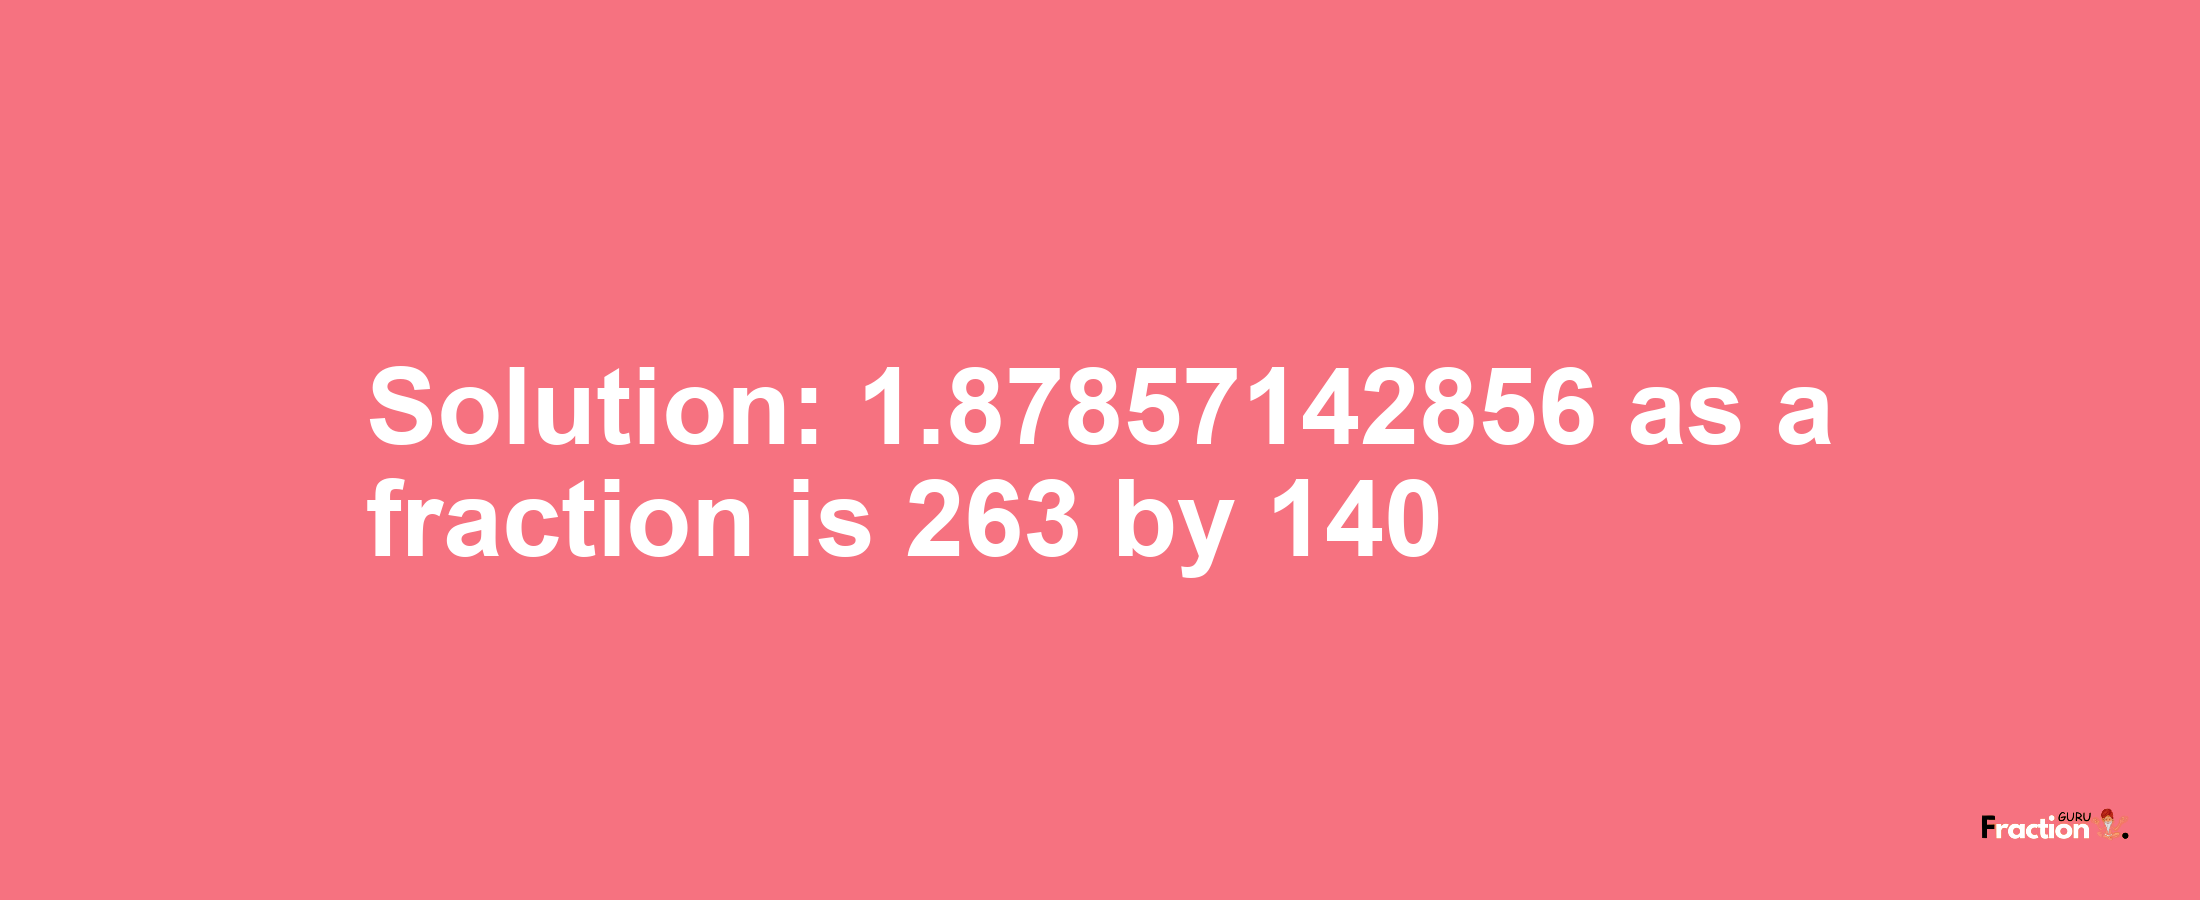 Solution:1.87857142856 as a fraction is 263/140